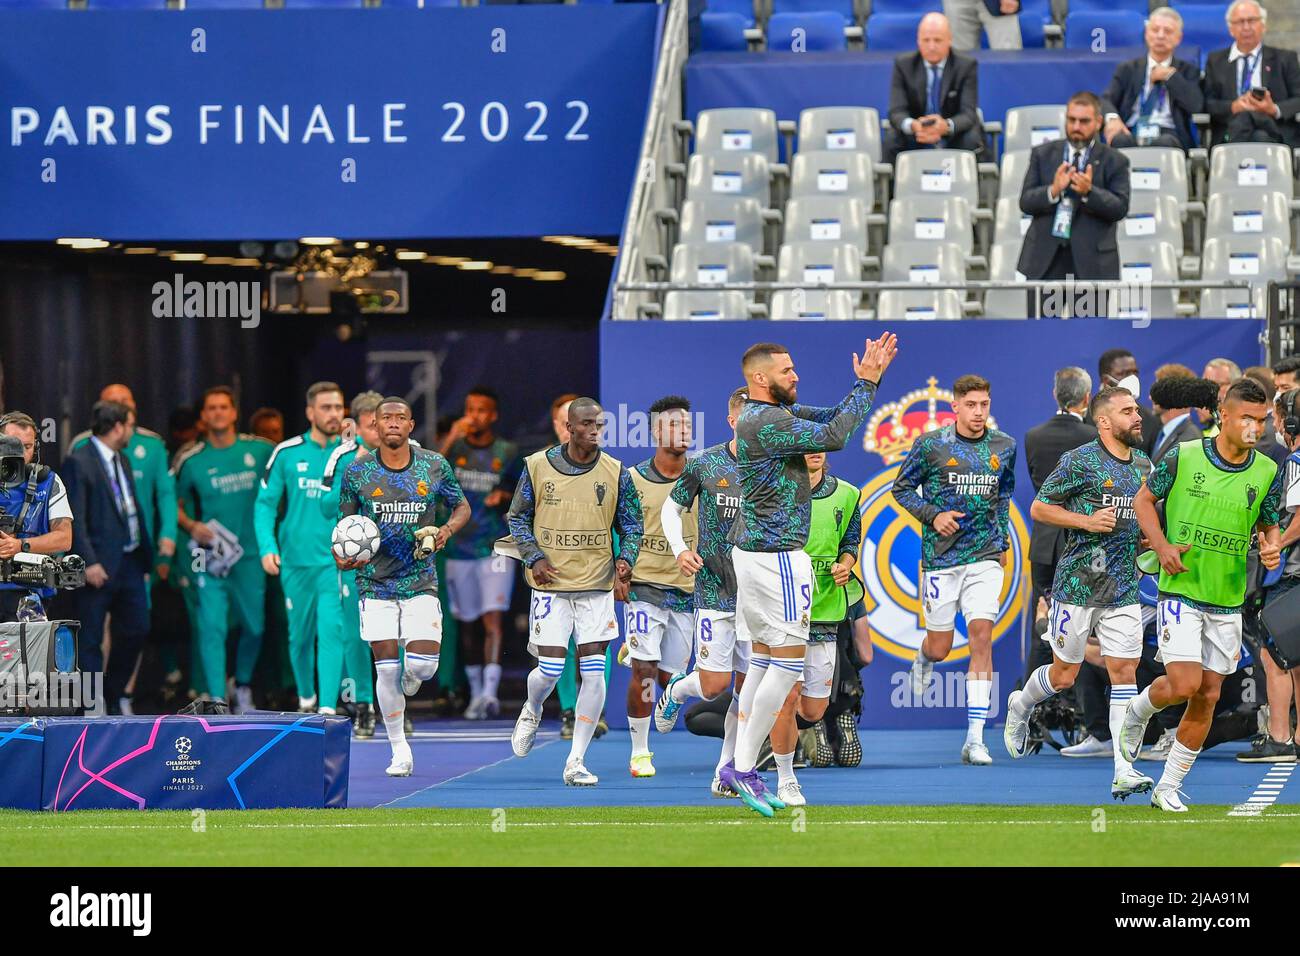 Paris, France. 28th, May 2022. The players of Real Madrid enter the pitch for the warm up before the UEFA Champions League final between Liverpool and Real Madrid at the Stade de France in Paris. (Photo credit: Gonzales Photo - Tommaso Fimiano). Stock Photo